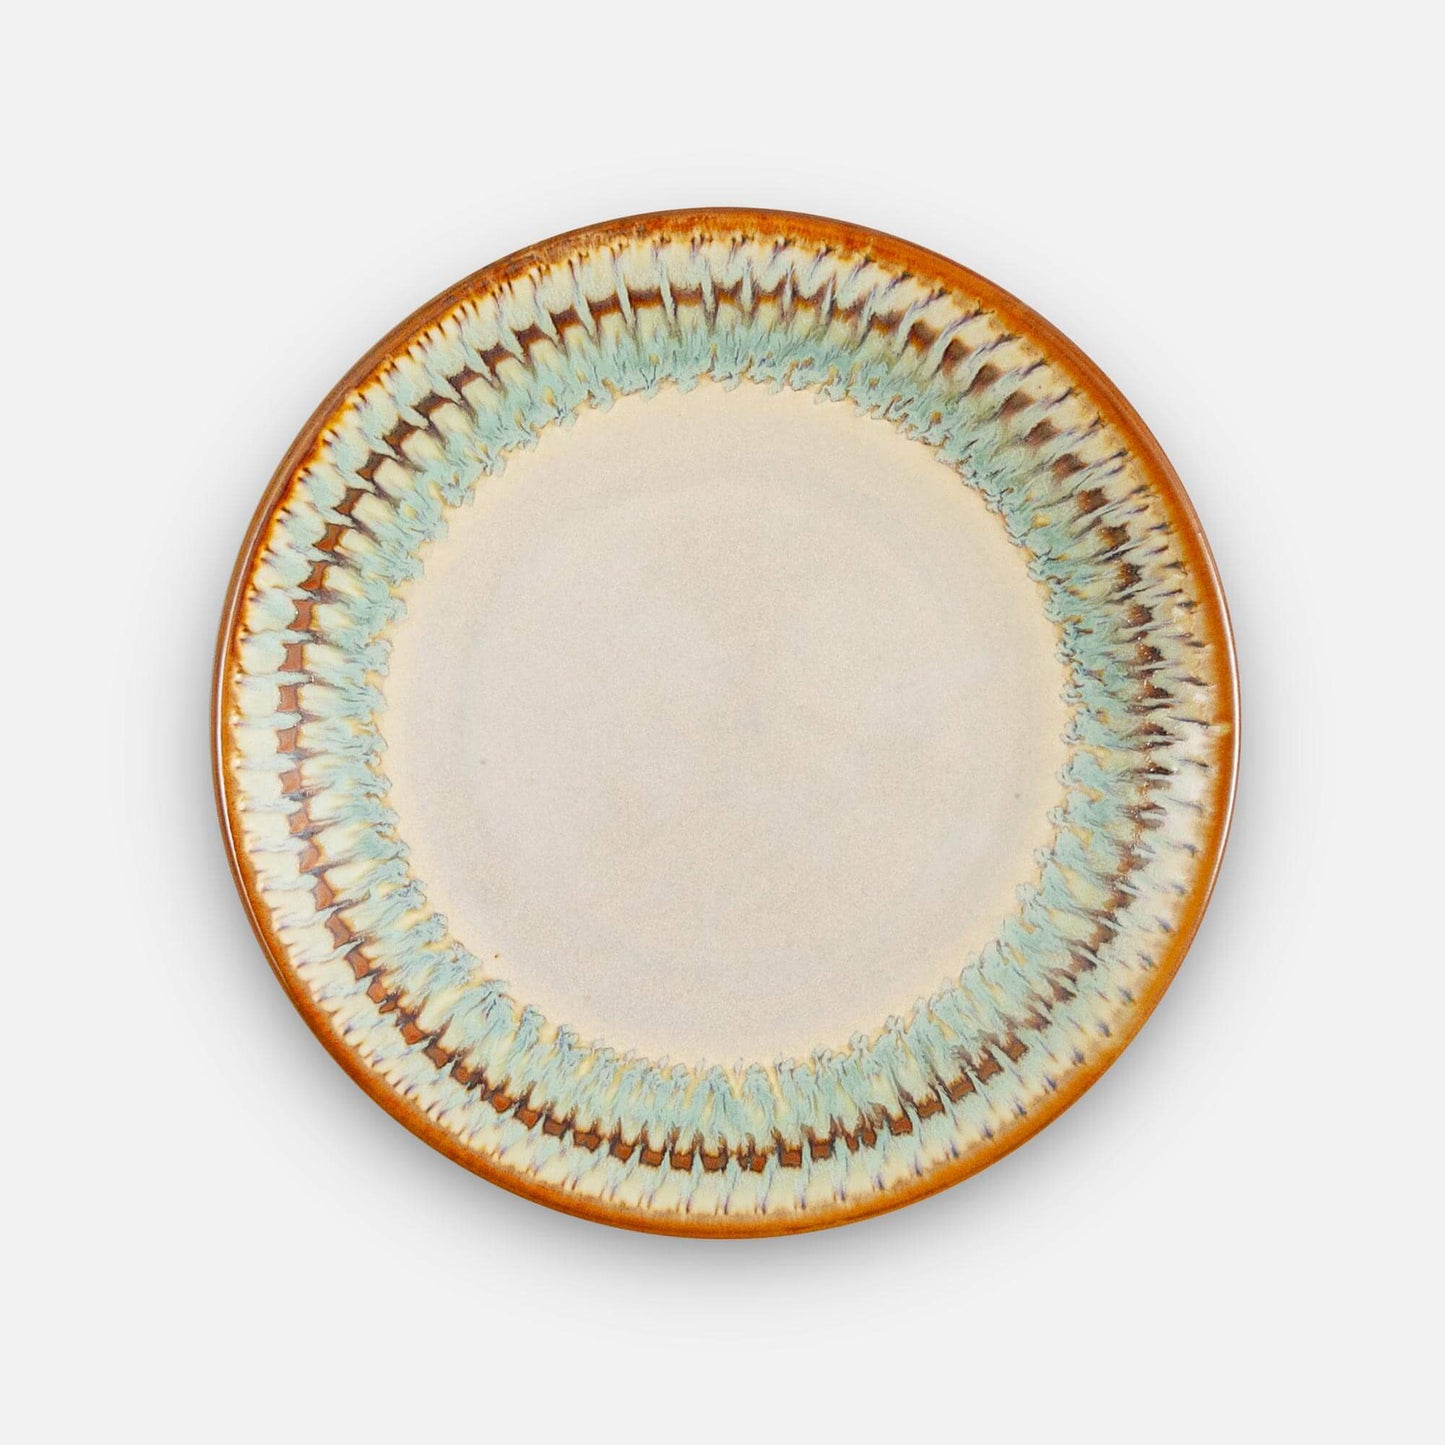 Handmade Pottery Footed Dessert Plate in Ivory & Green pattern made by Georgetown Pottery in Maine